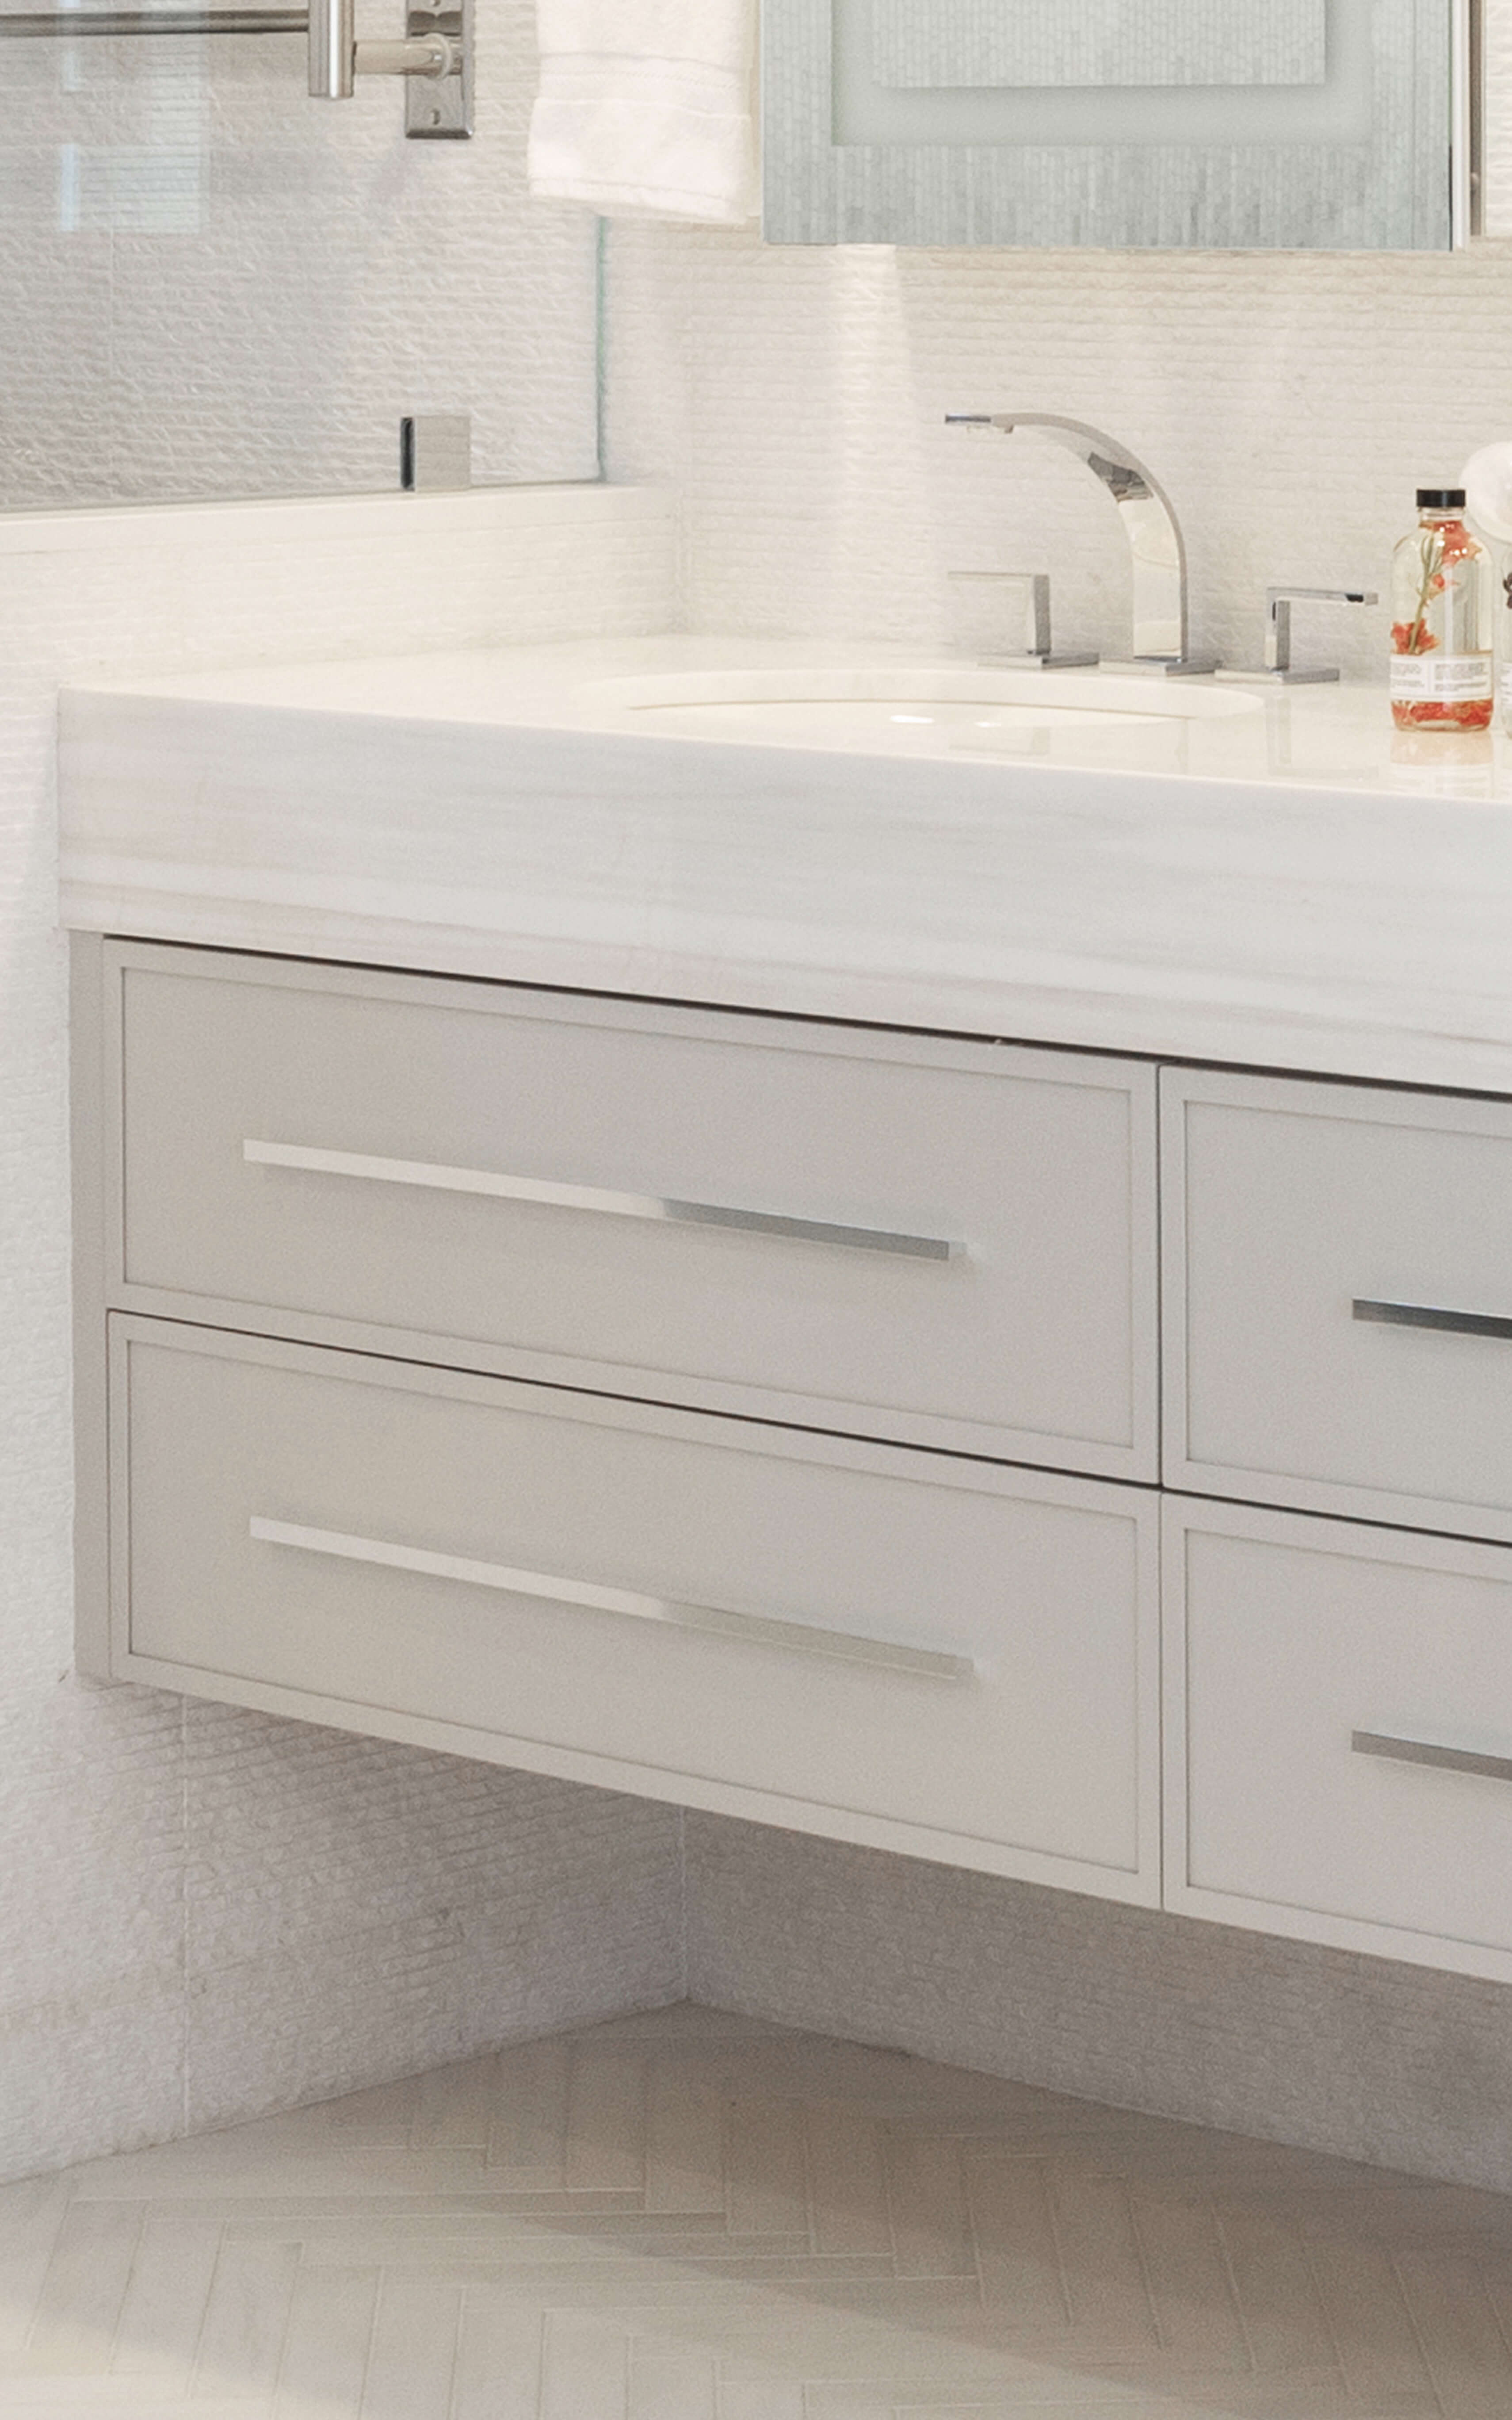 A close-up of the floating vanity with very thin profiles on the flat panel door. The wall hug vanity is shown with a soft, light gray painted finish, long satin nickel hardware pulls, and a thick quartz countertop.